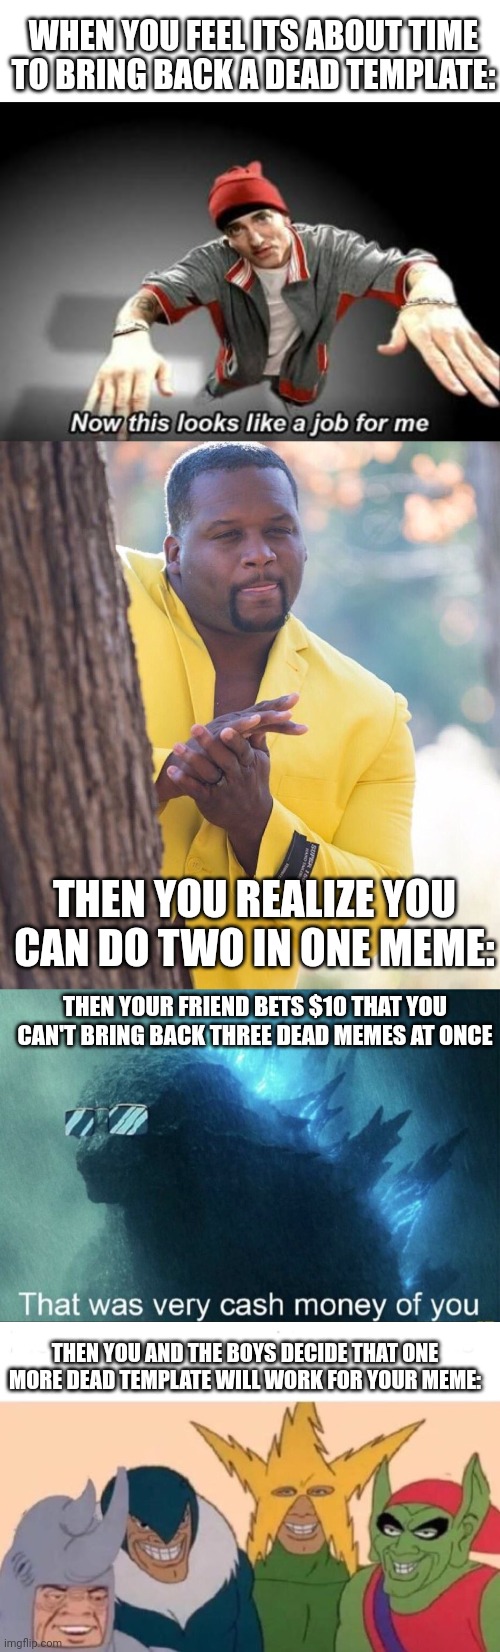 Lets go four dead memes! | WHEN YOU FEEL ITS ABOUT TIME TO BRING BACK A DEAD TEMPLATE:; THEN YOU REALIZE YOU CAN DO TWO IN ONE MEME:; THEN YOUR FRIEND BETS $10 THAT YOU CAN'T BRING BACK THREE DEAD MEMES AT ONCE; THEN YOU AND THE BOYS DECIDE THAT ONE MORE DEAD TEMPLATE WILL WORK FOR YOUR MEME: | image tagged in blank white template,now this looks like a job for me,black guy hiding behind tree,that was very cash money of you,memes | made w/ Imgflip meme maker